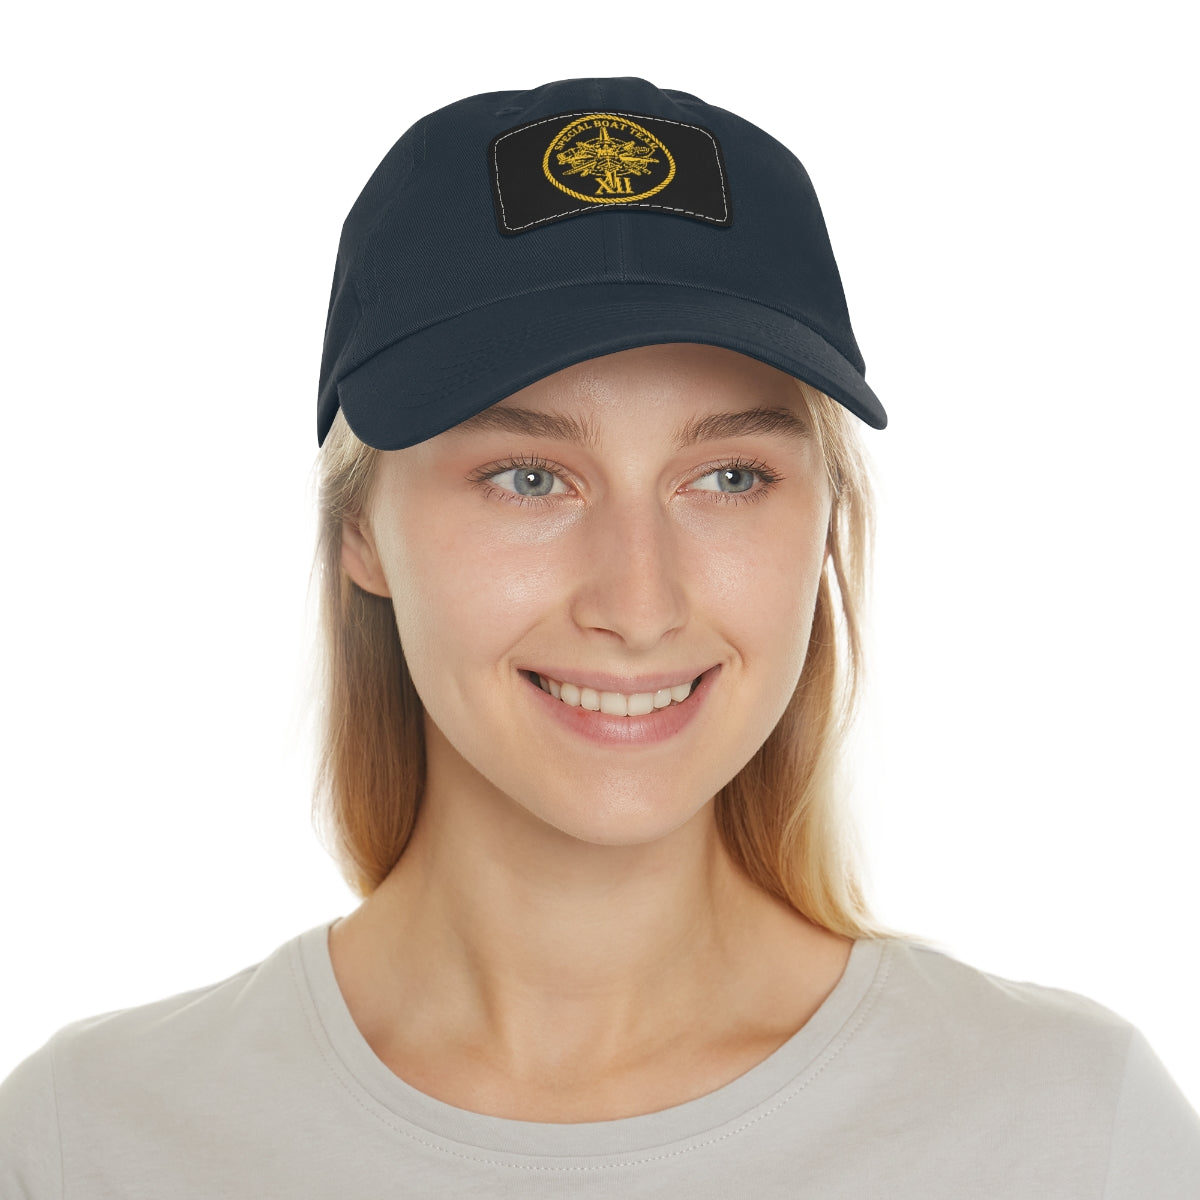 SBT 12 v2 Hat with Leather Patch (Gold)